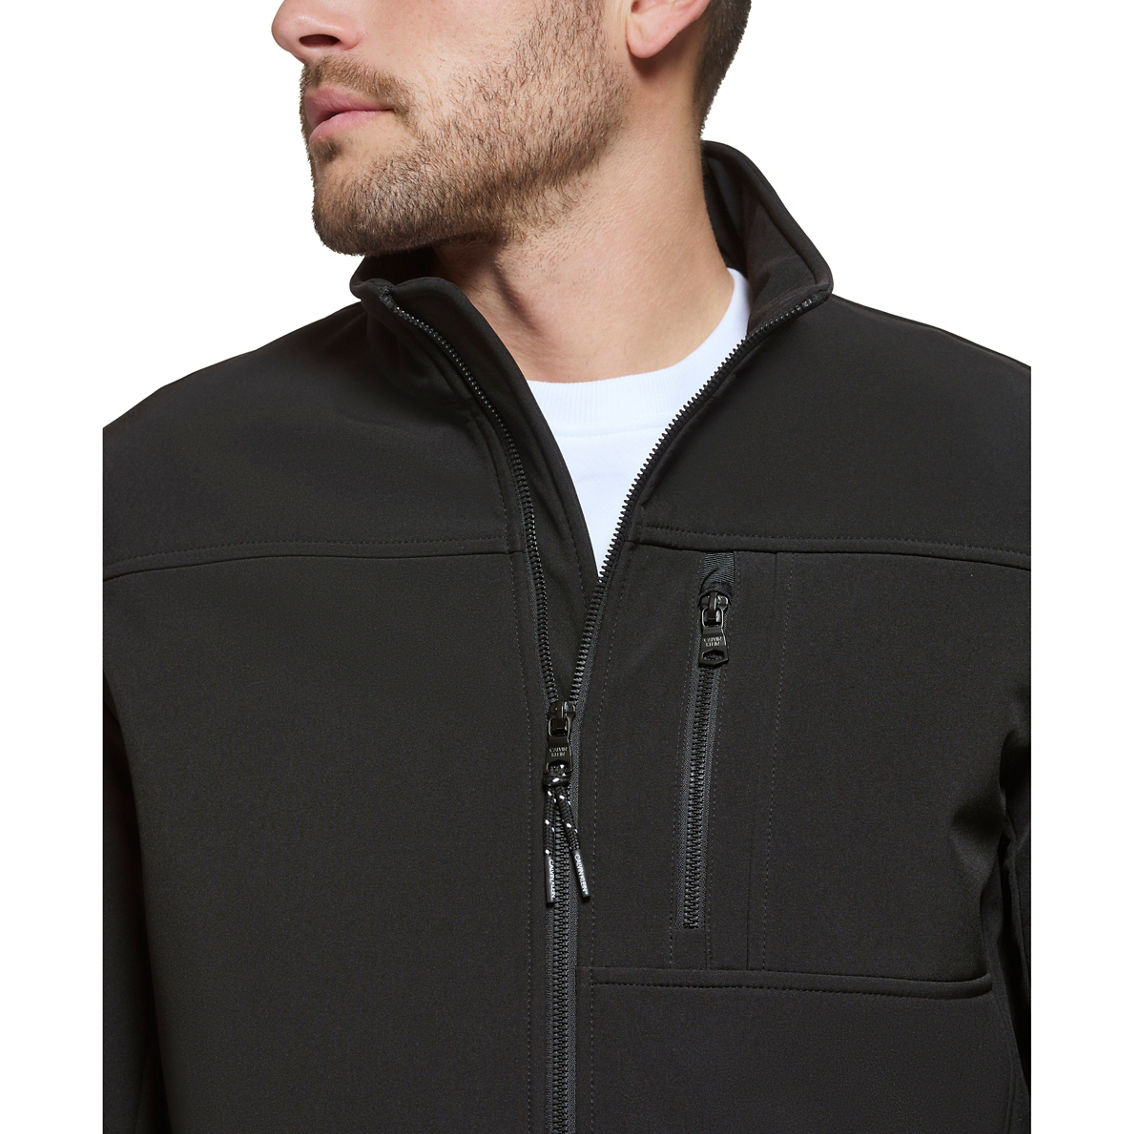 Calvin Klein Soft Shell Jacket - Image 7 of 10